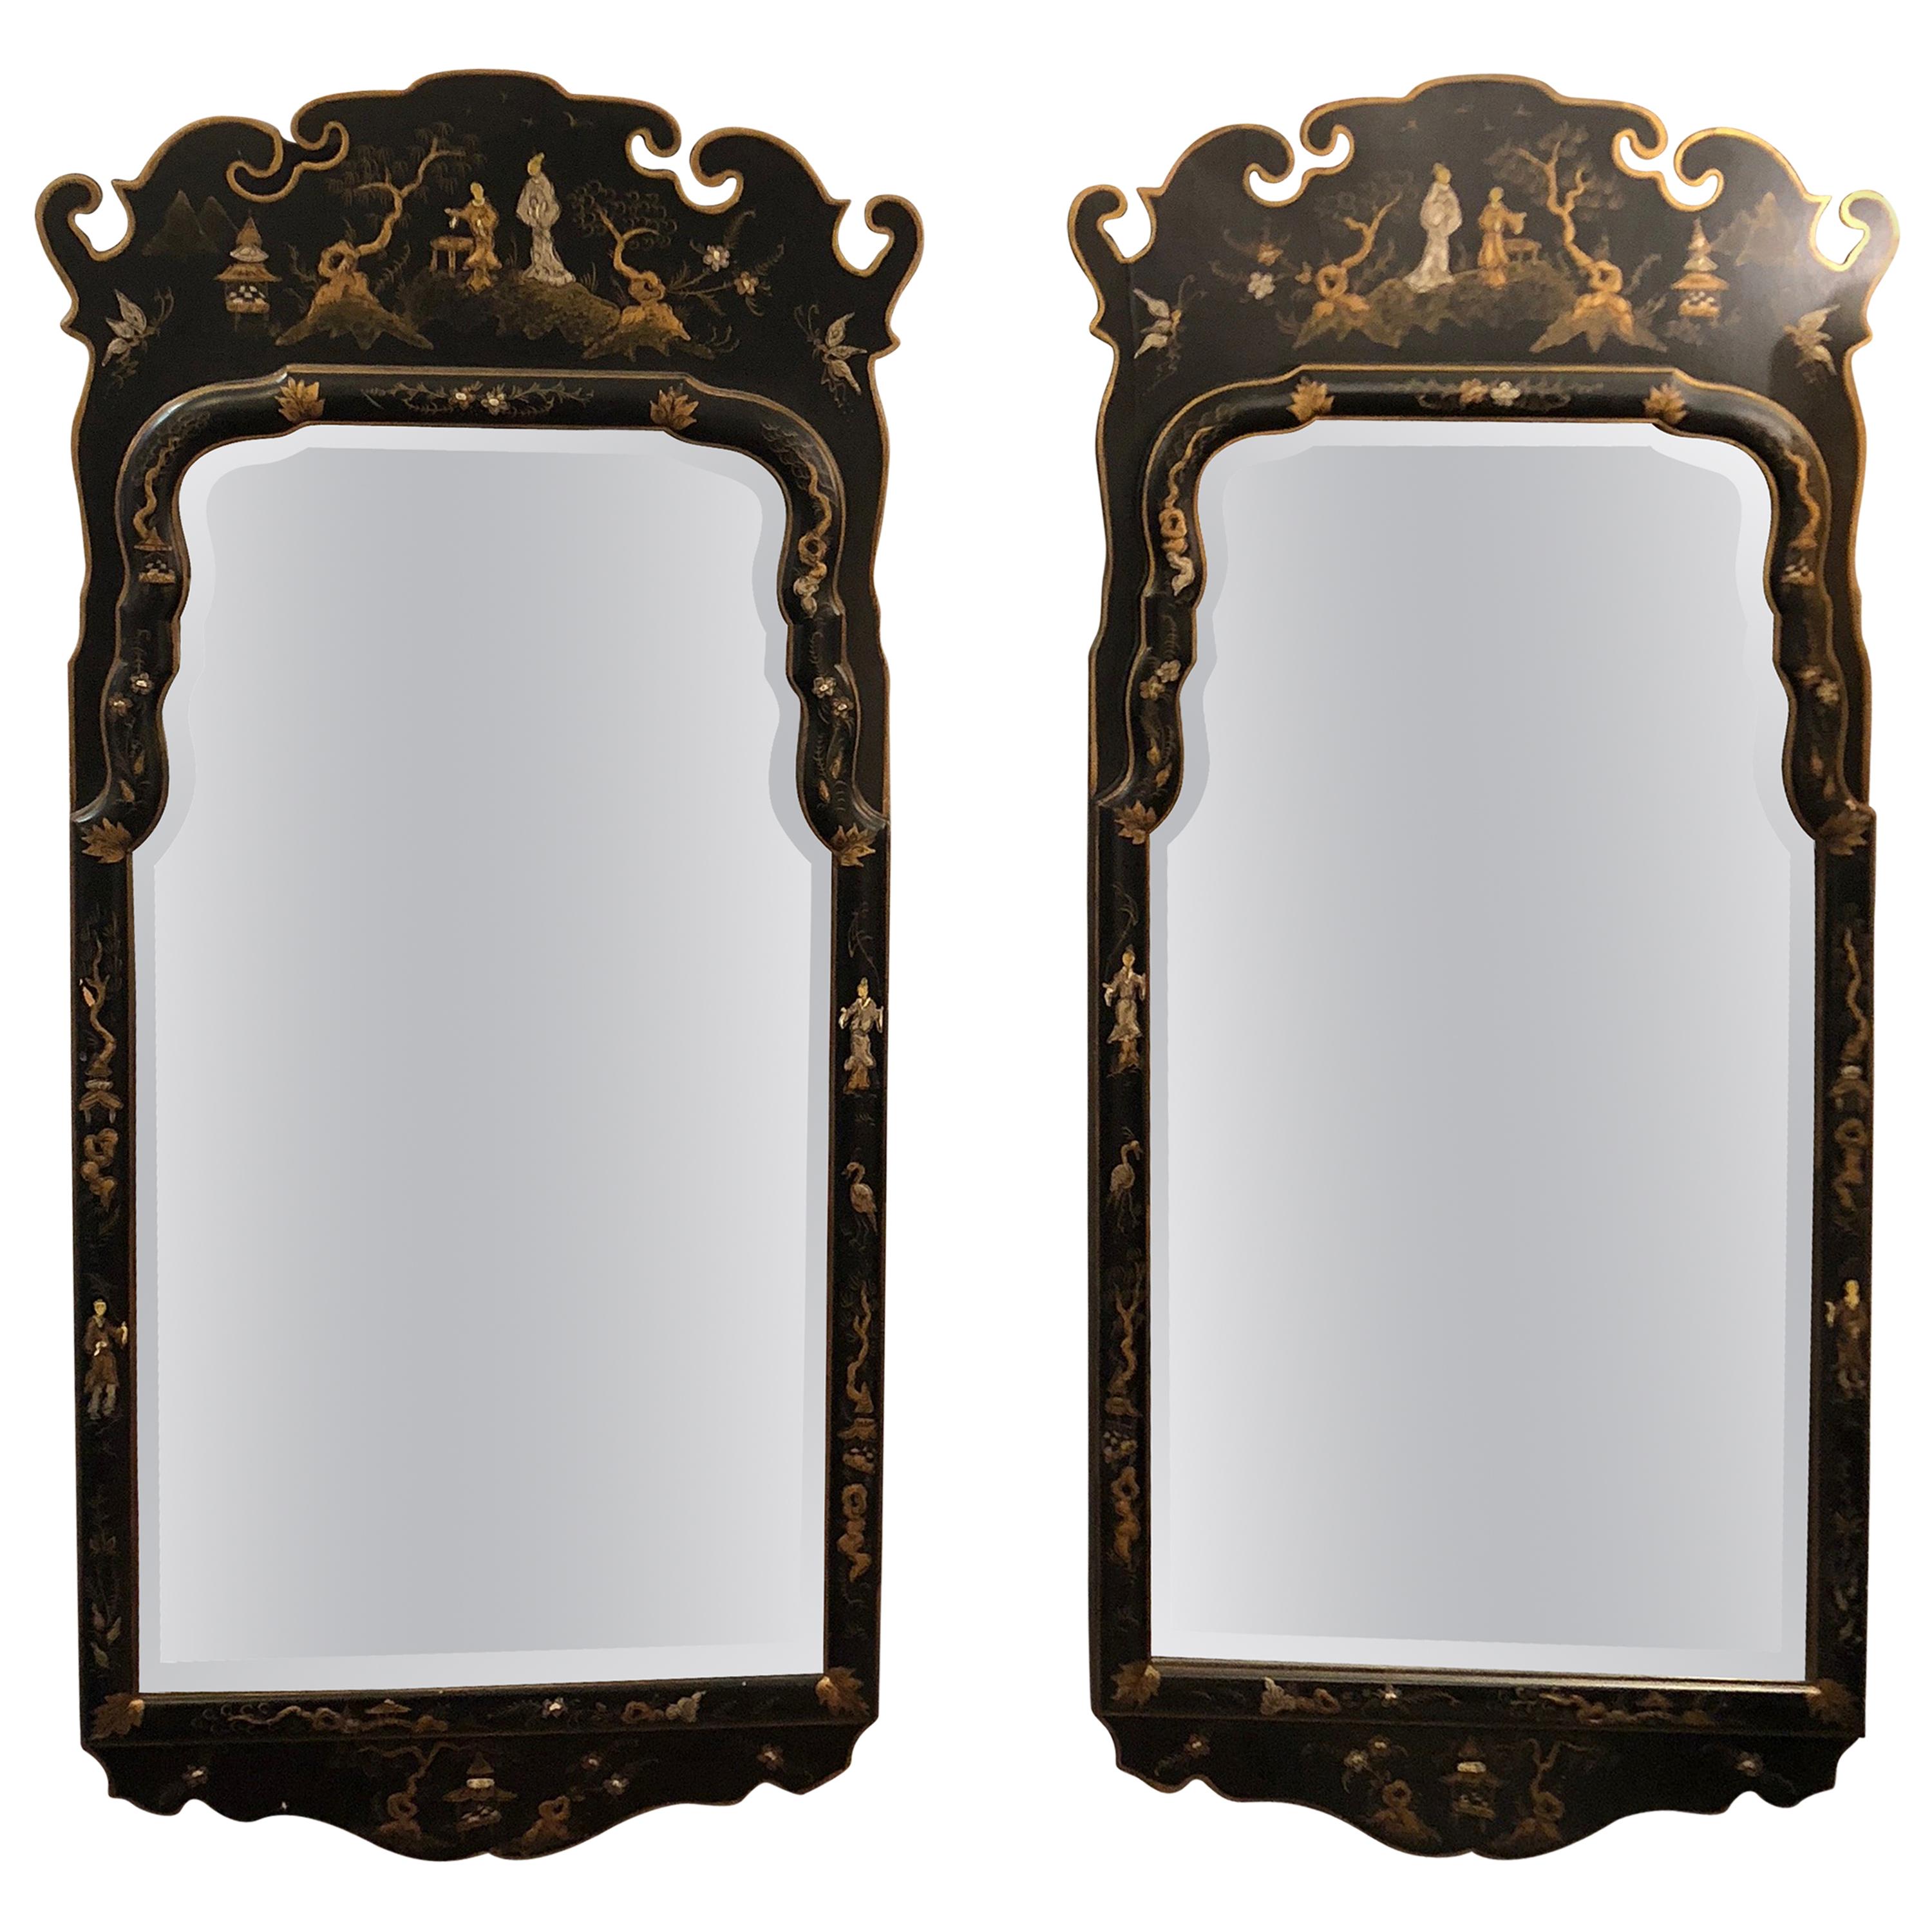 Pair of Sensational Chinoiserie Mirrors in Black and Gold